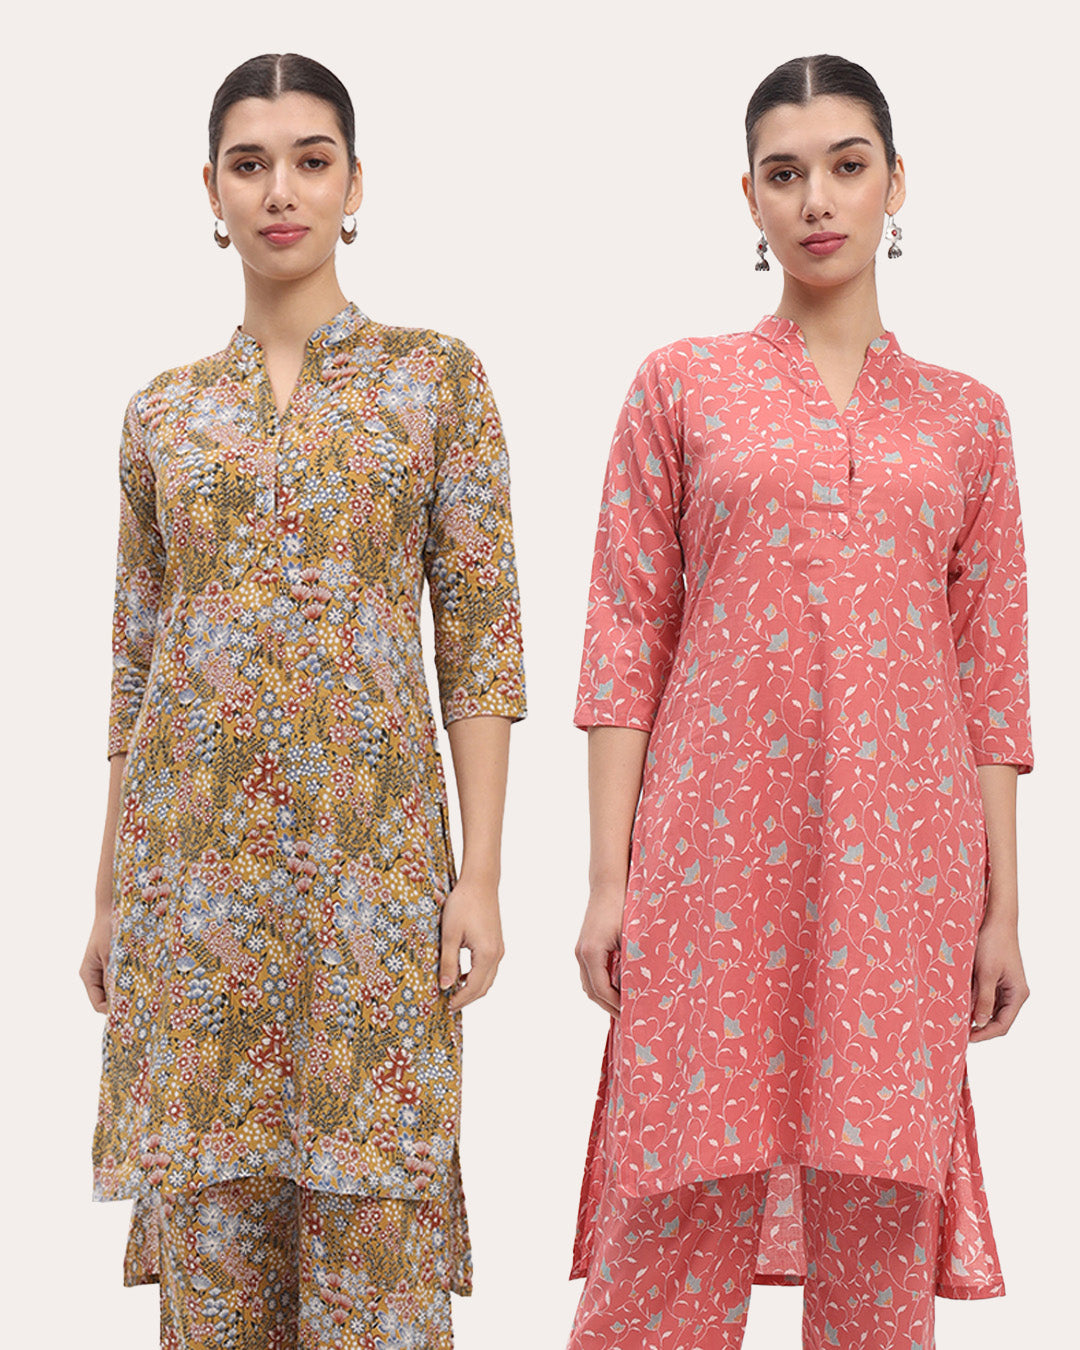 Combo: Golden Blossom & English Floral Garden High-Low Printed Kurta (Without Bottoms)